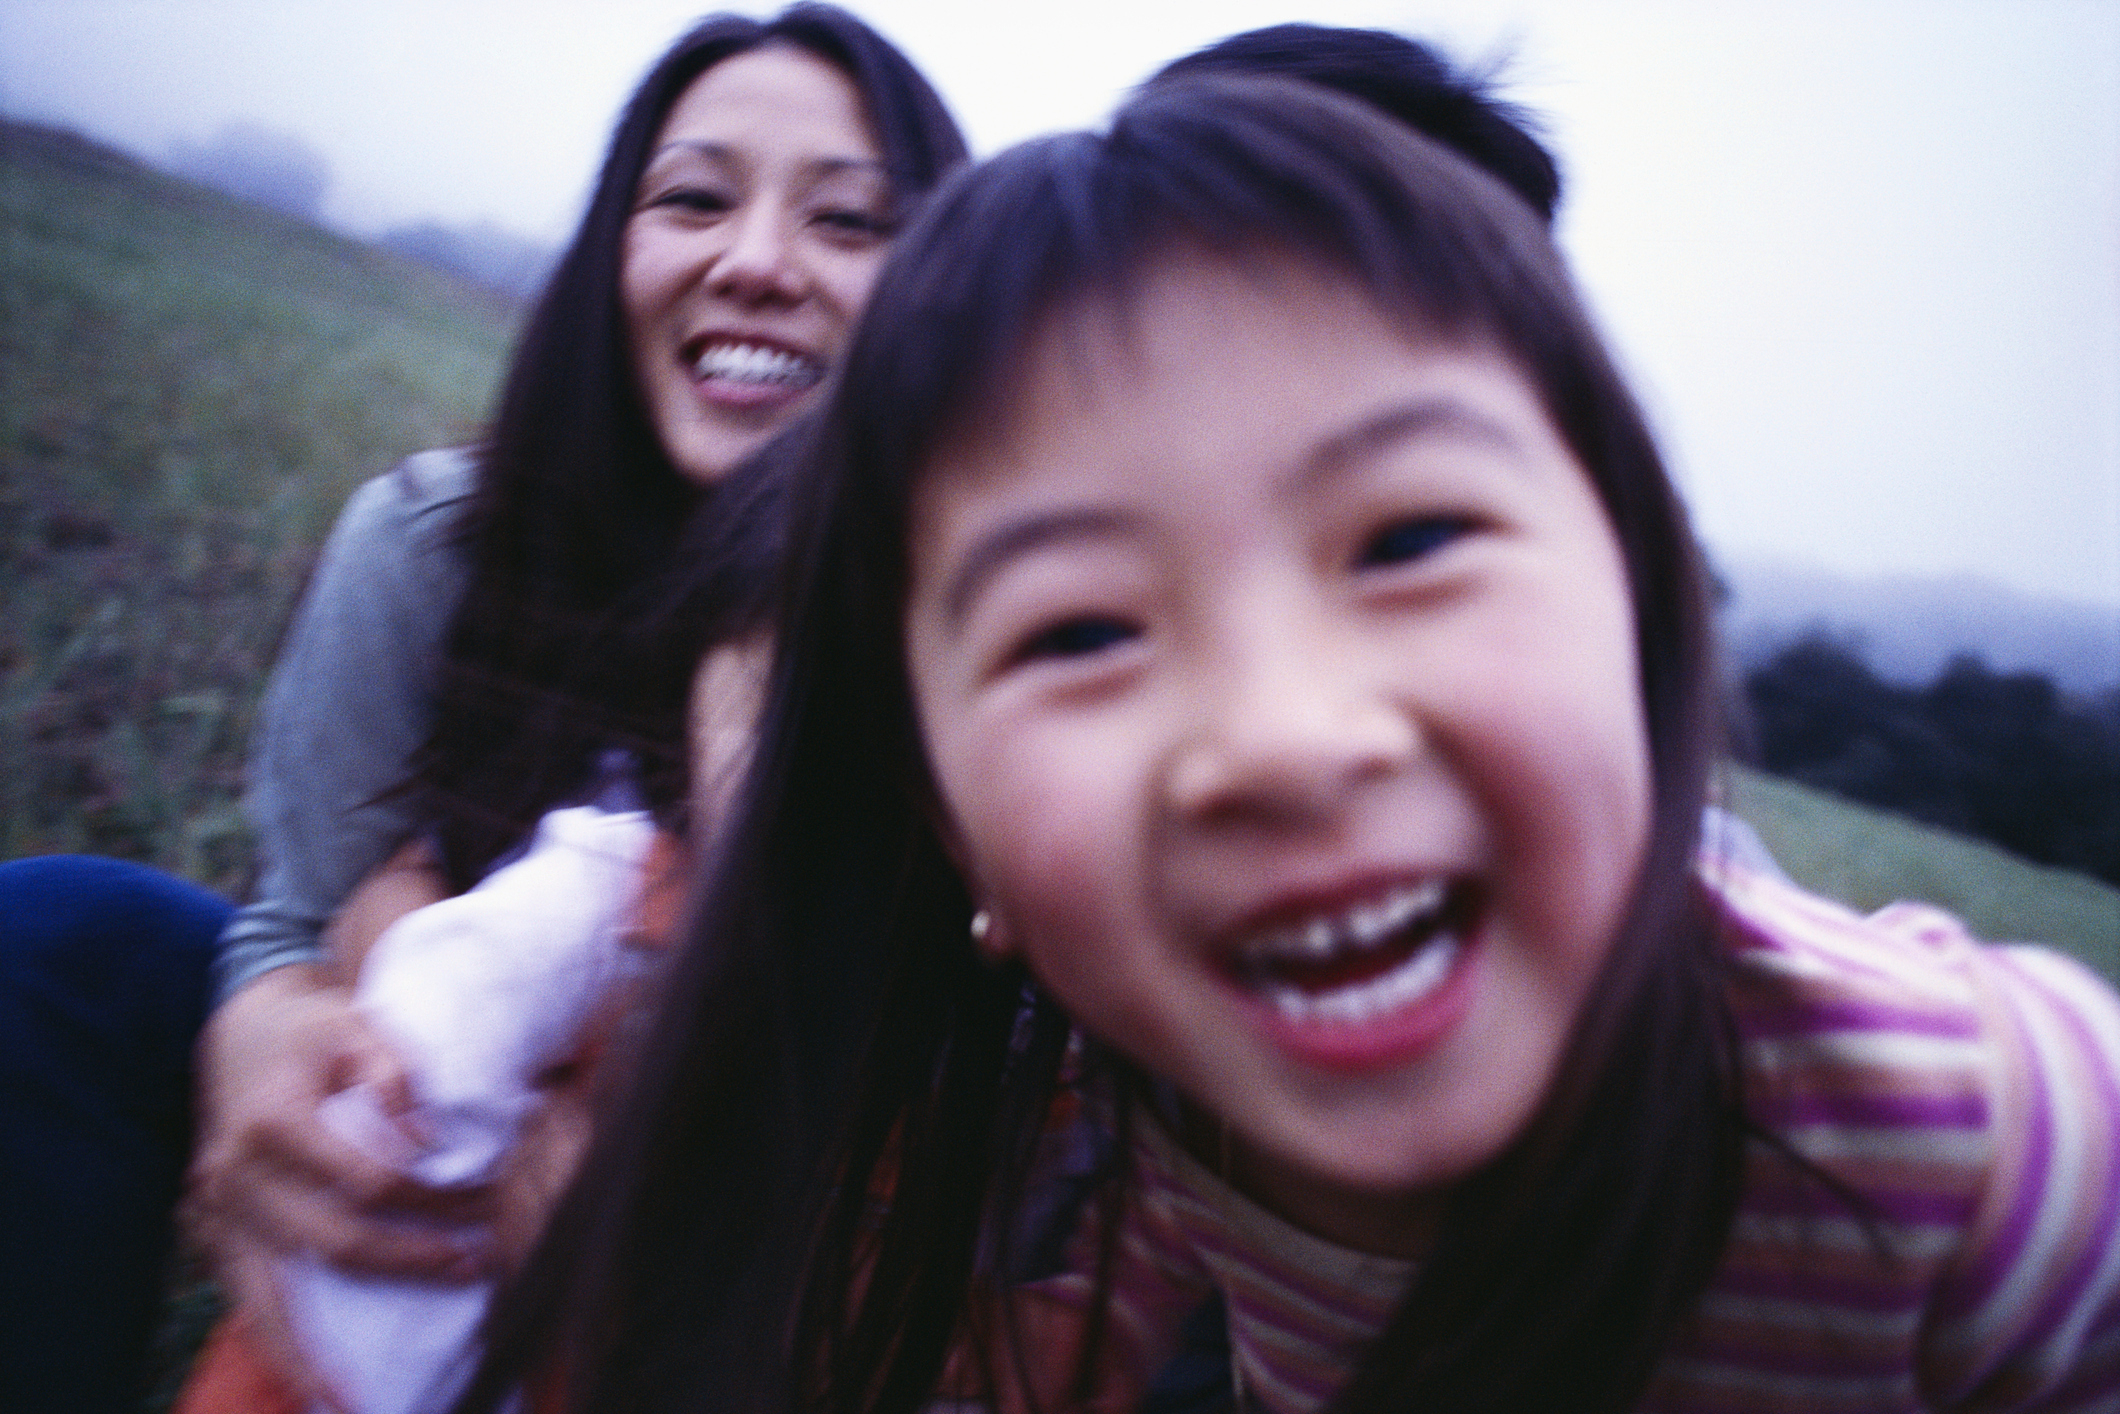 Woman and child smiling, close-up, out of focus, giving an impression of joy and movement